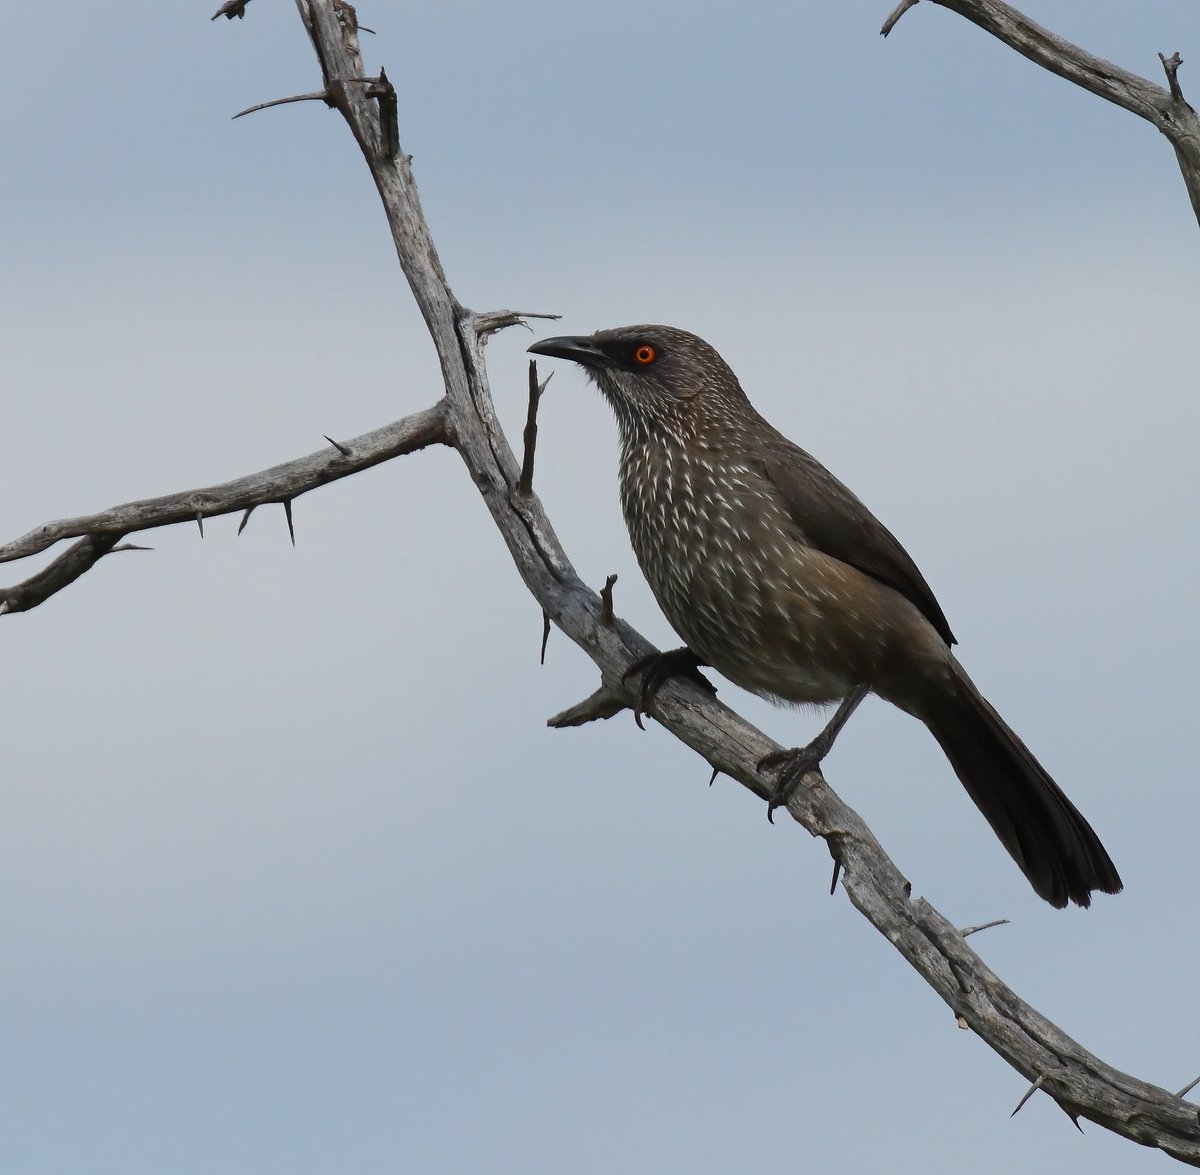 The aptly named Arrow-marked babbler. They fly around in small flocks babbling to each other incessantly.